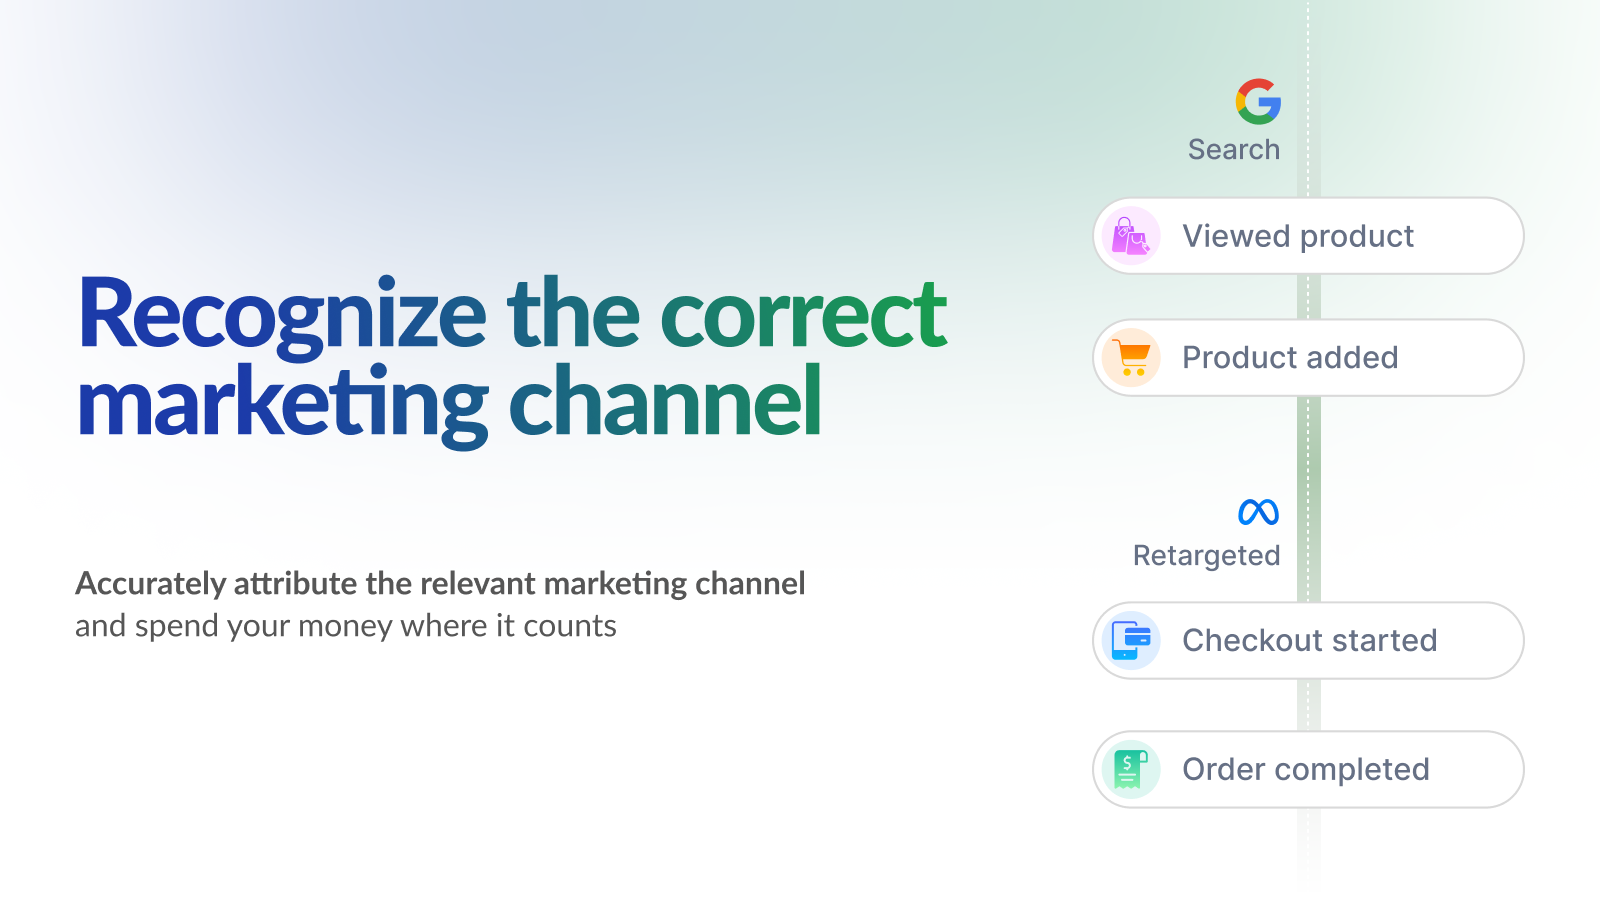 Recognize the correct marketing channel